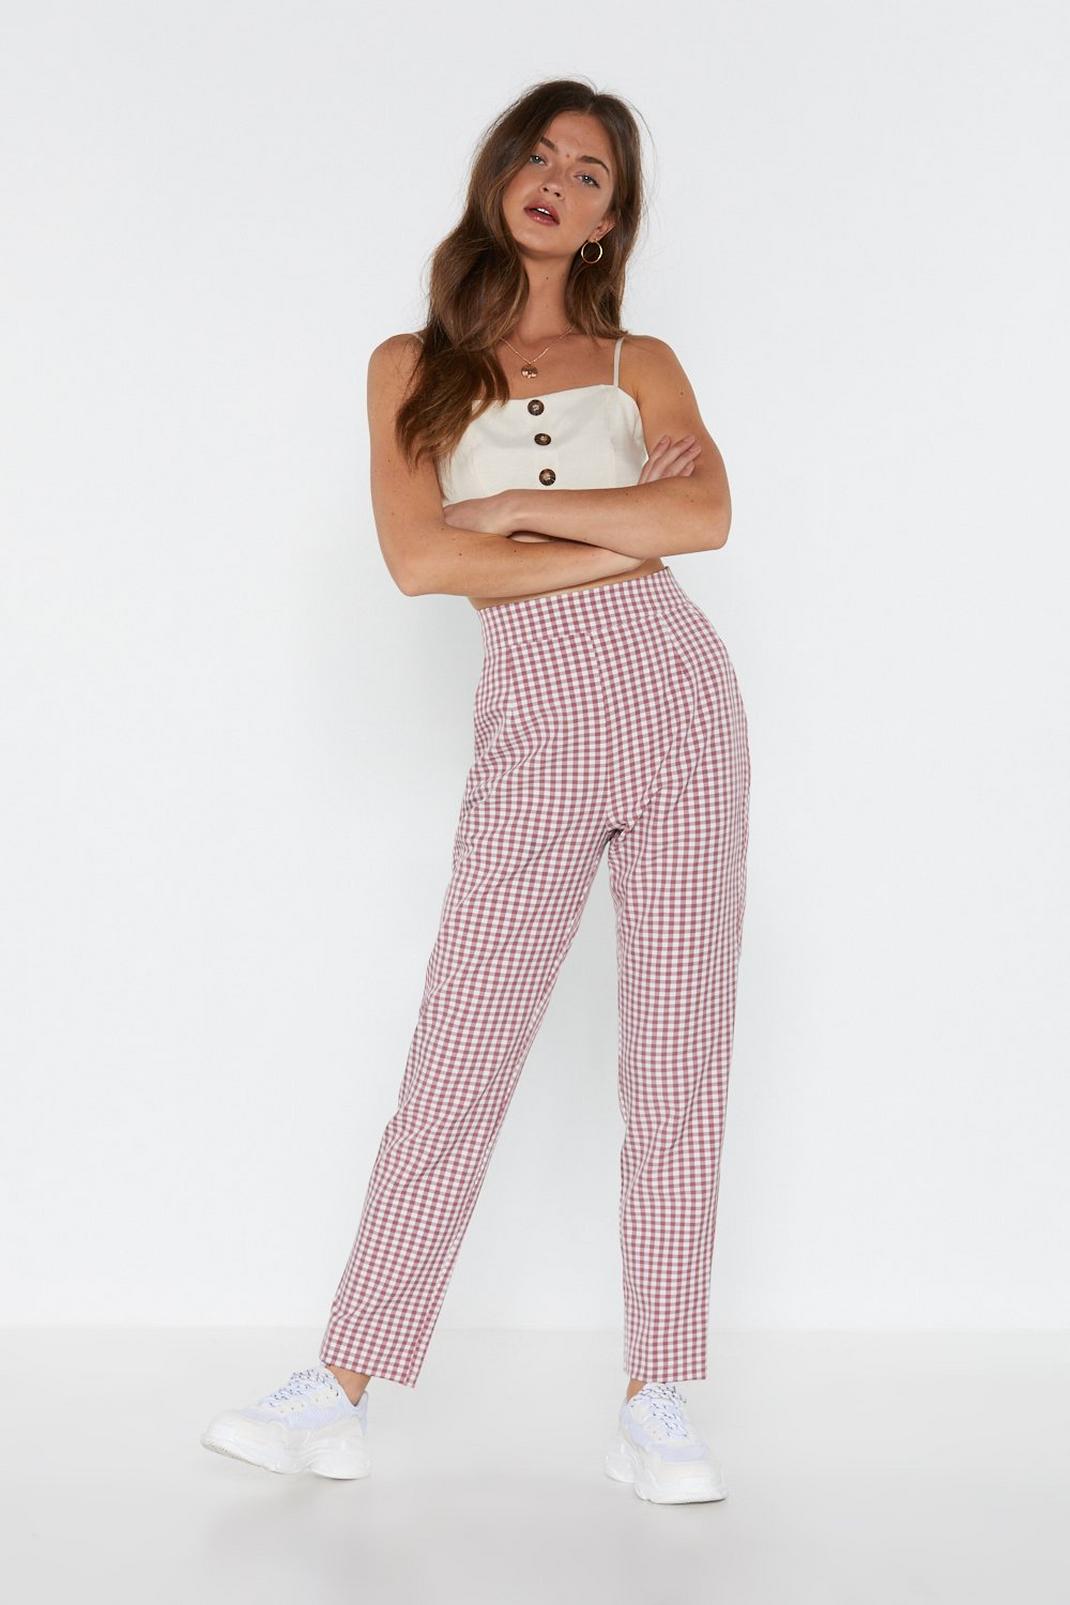 Square On Earth Gingham Pants image number 1